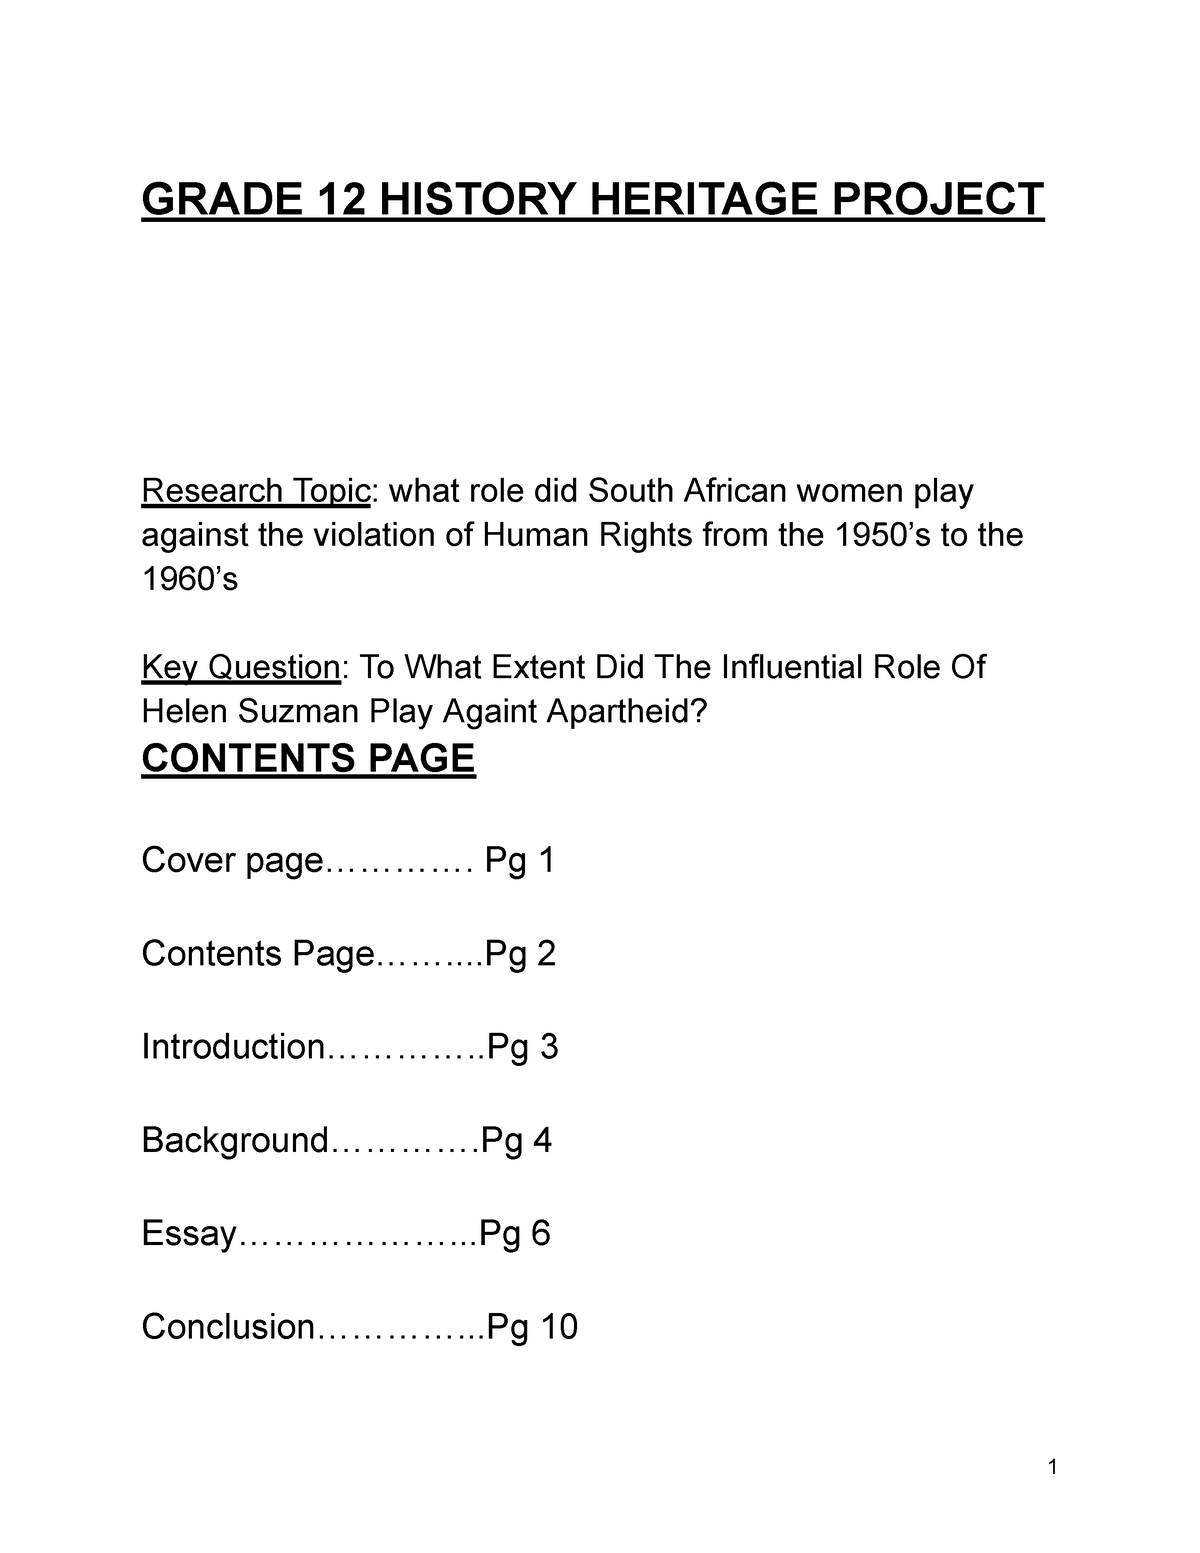 history heritage assignment grade 12